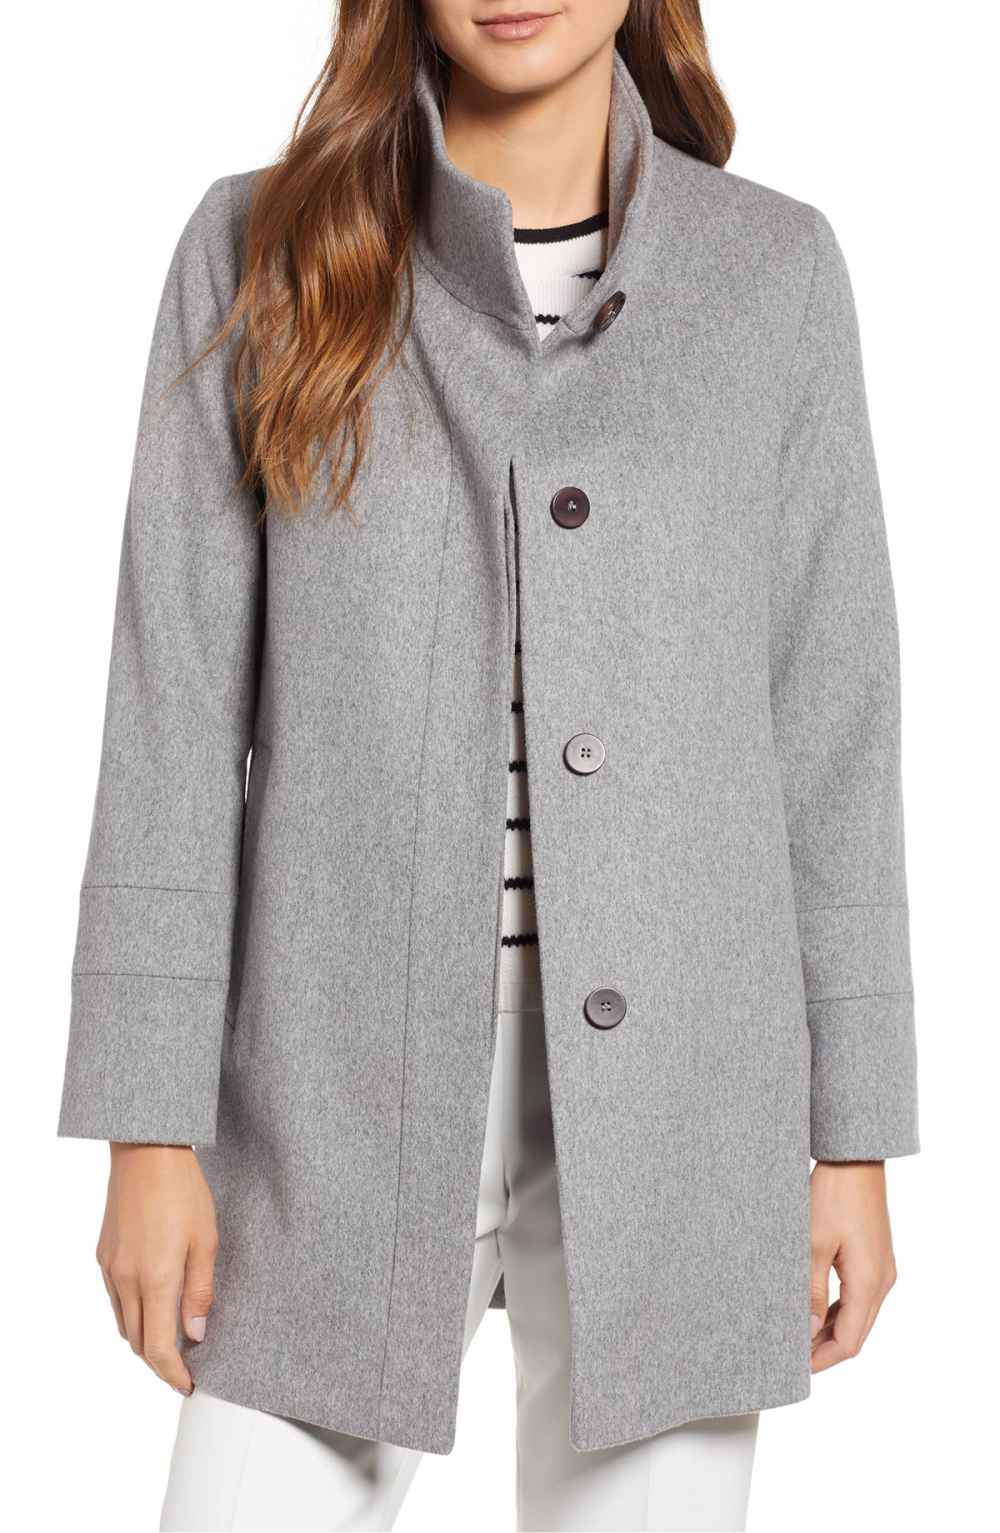 7 Pieces From the Nordstrom Winter Sale That Are 50% Off or More | Us ...